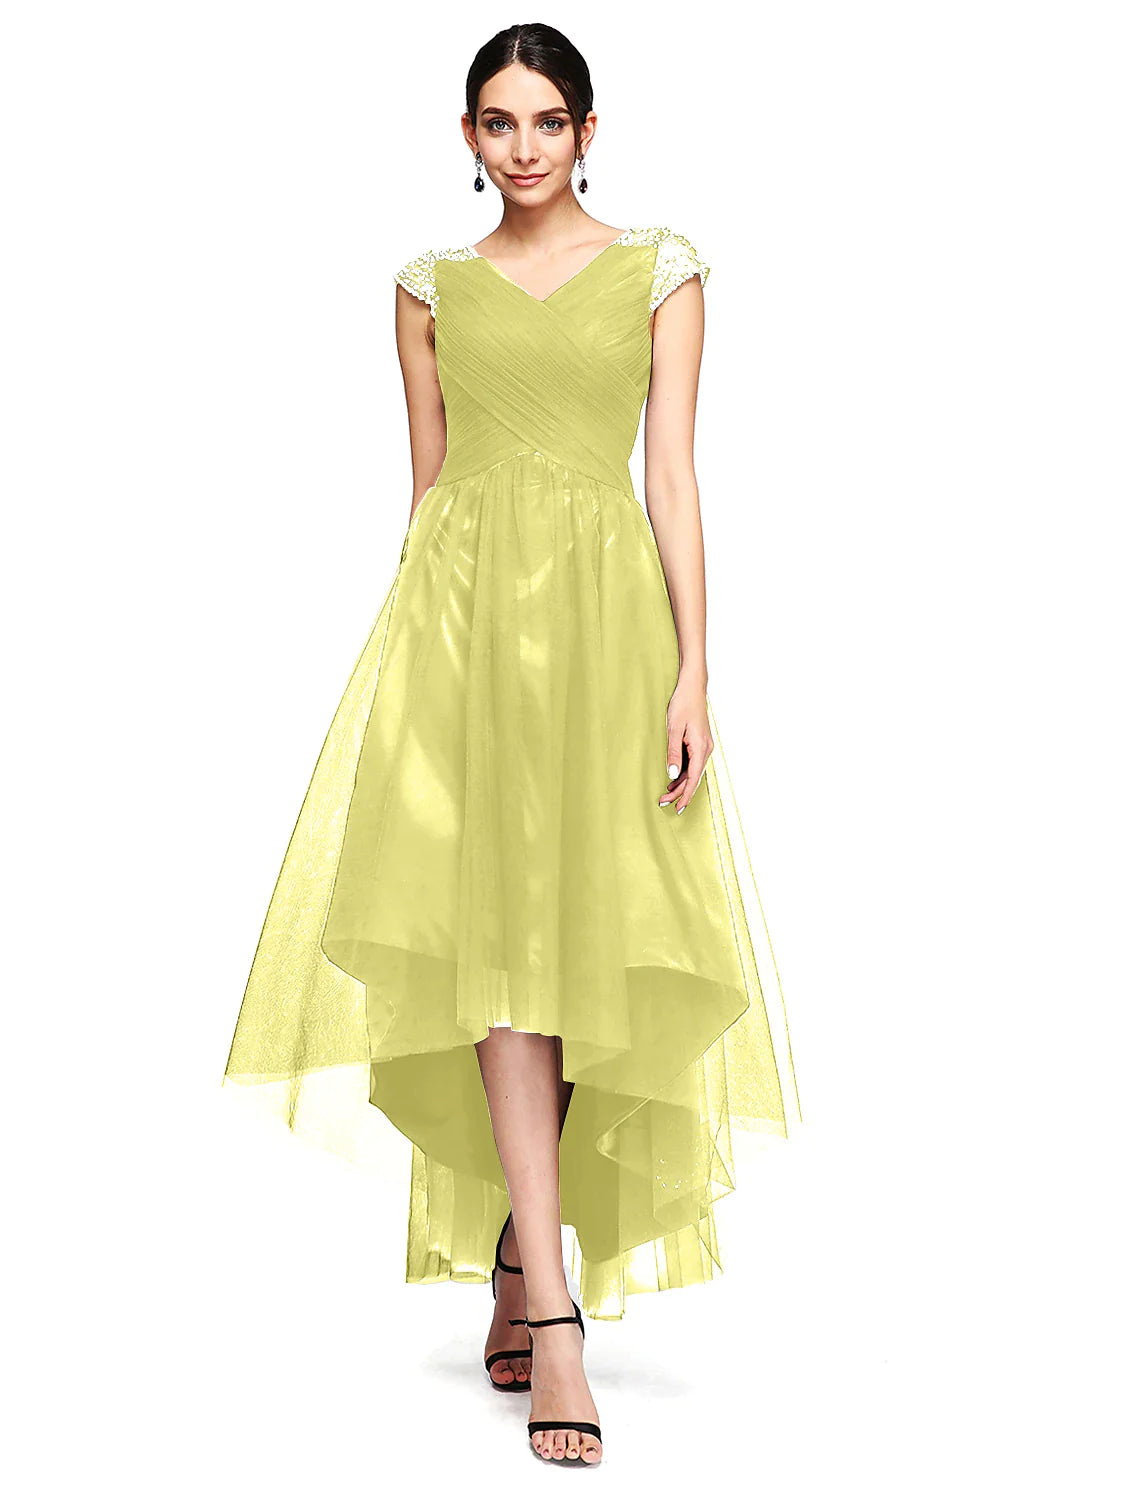 A-Line Special Occasion Dresses Open Back Dress Wedding Guest Asymmetrical Short Sleeve V Neck Tulle with Criss Cross Beading